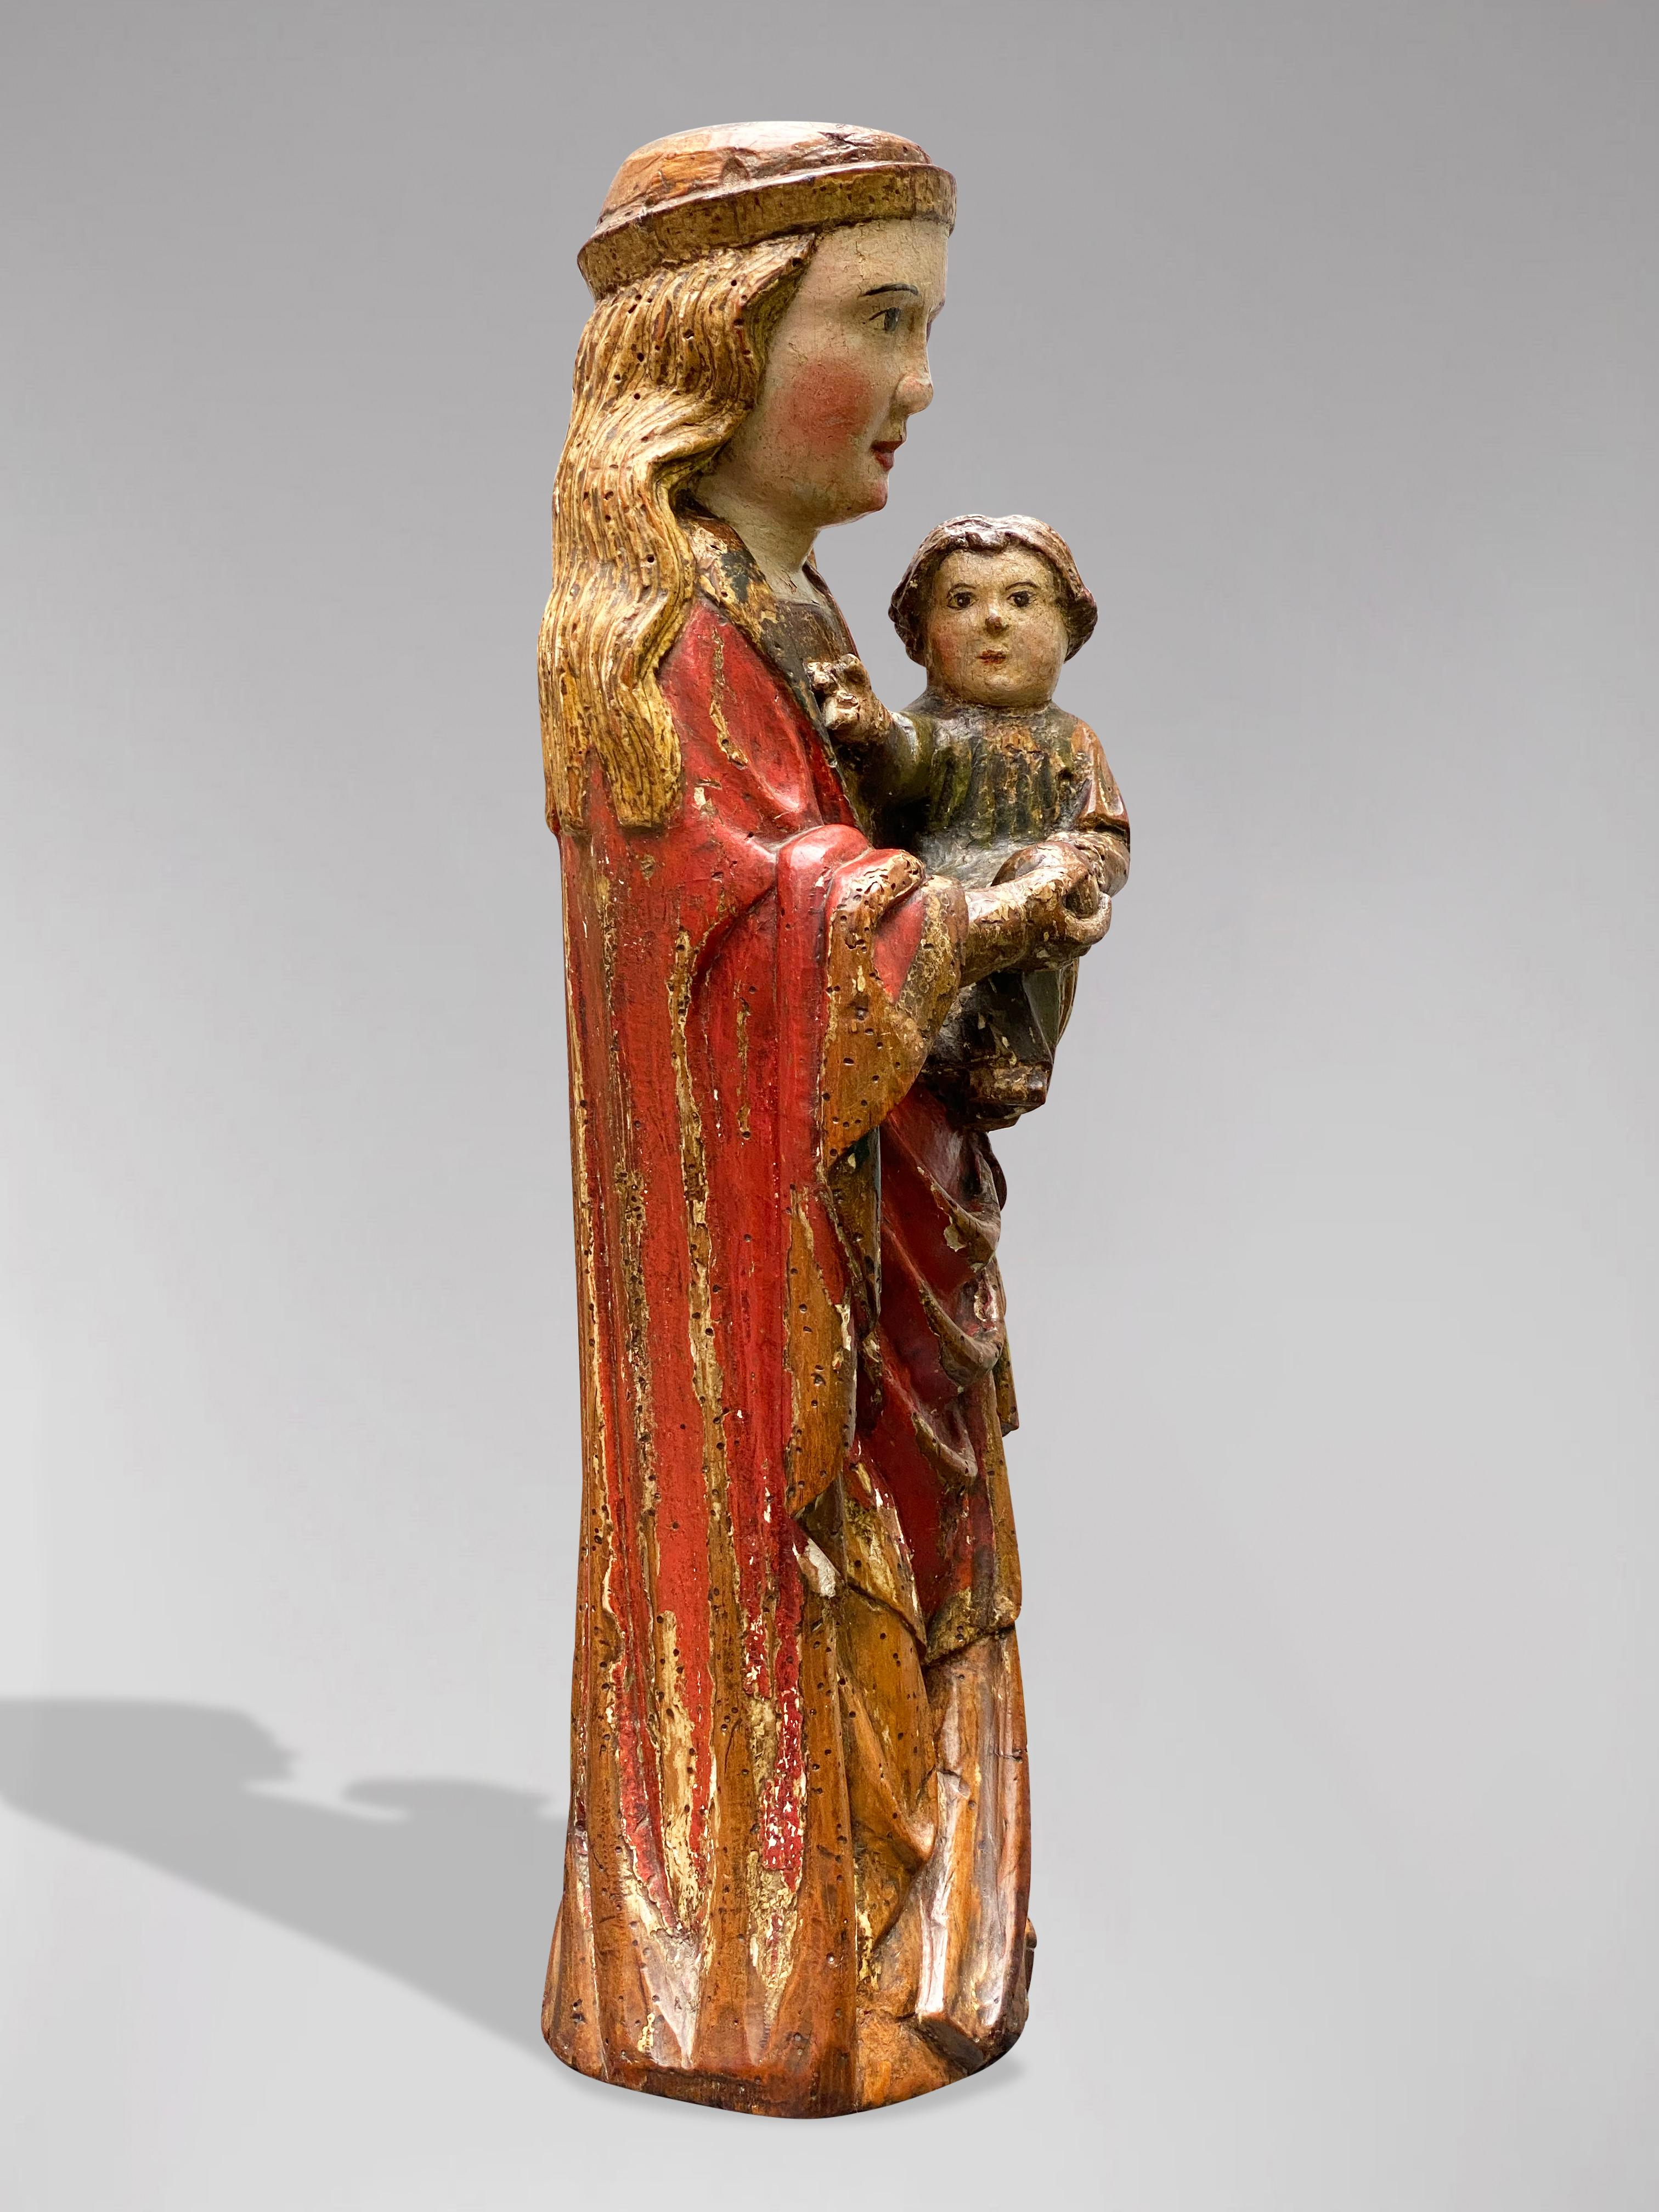 Description: A Spanish Statue of the Virgin Mary with Child Jezus, Circa 1600, polychromed wood

Statue : Madonna and Child
Object Type: Statuette
Artist, Sculptor / Maker: Unknown
Place of Origin: Spain
Period: Circa 1600
Materials and Techniques: